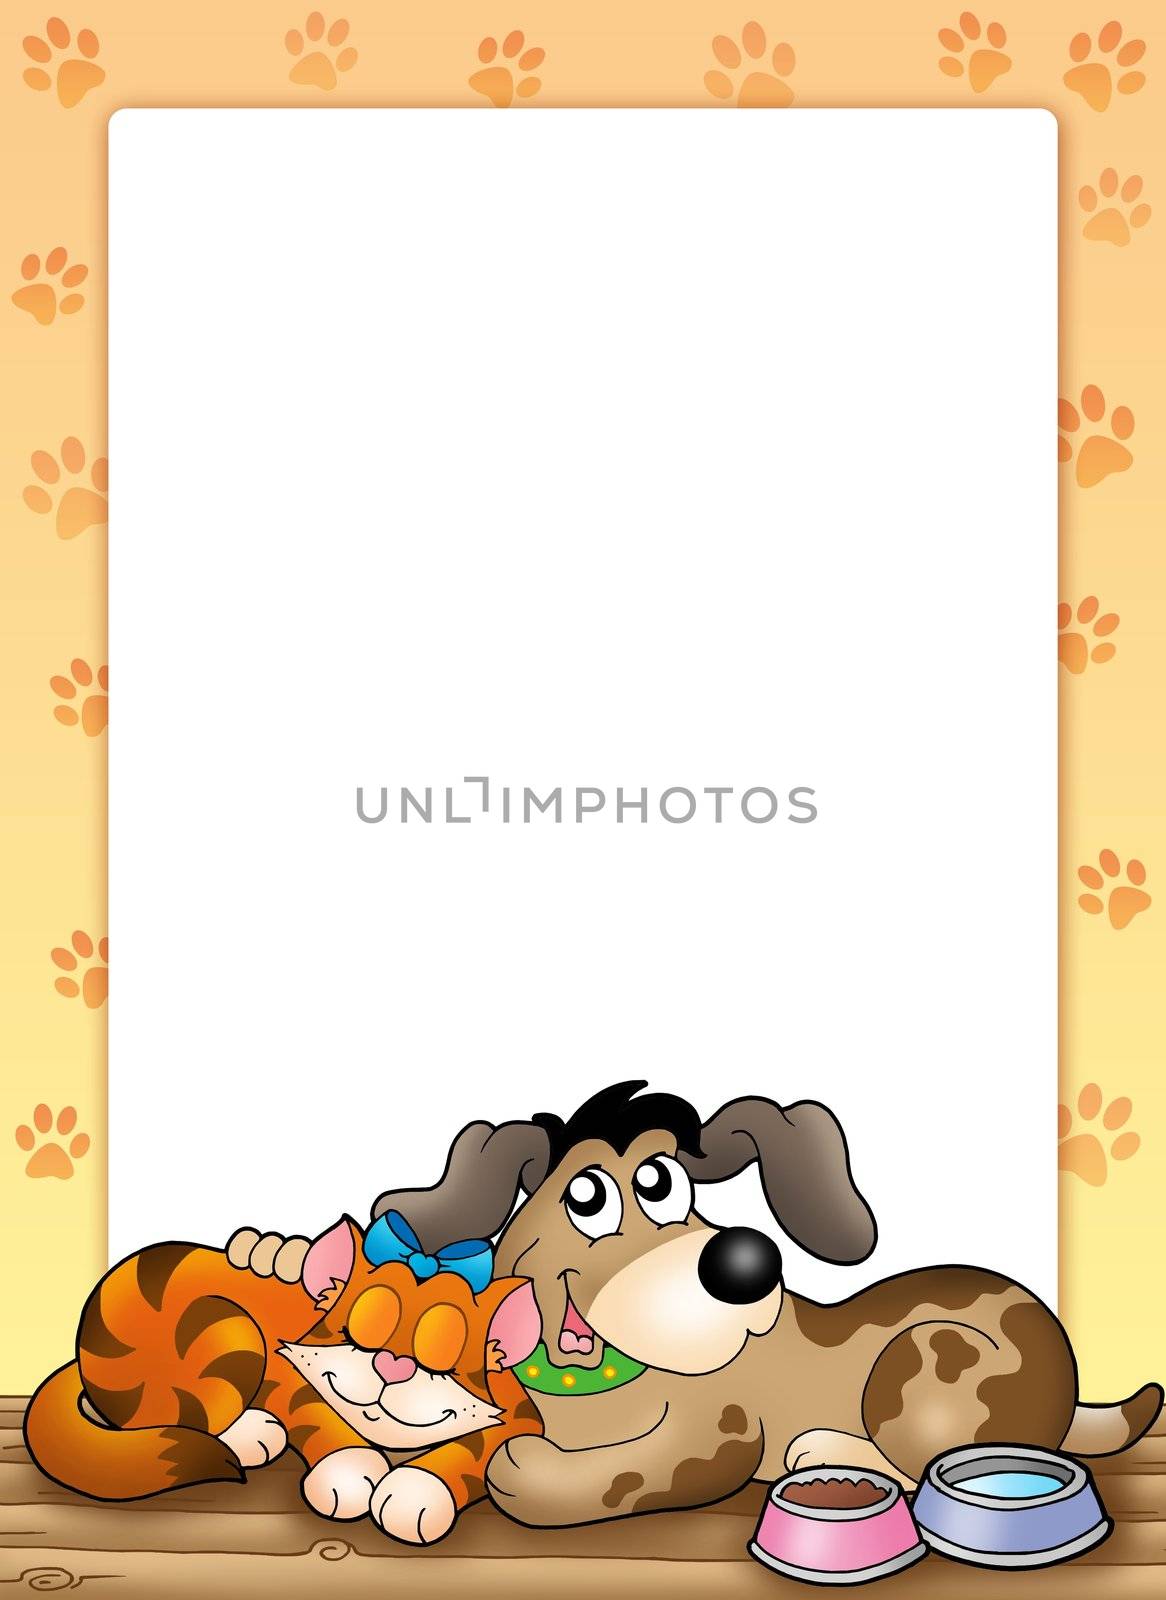 Frame with cute cat and dog - color illustration.